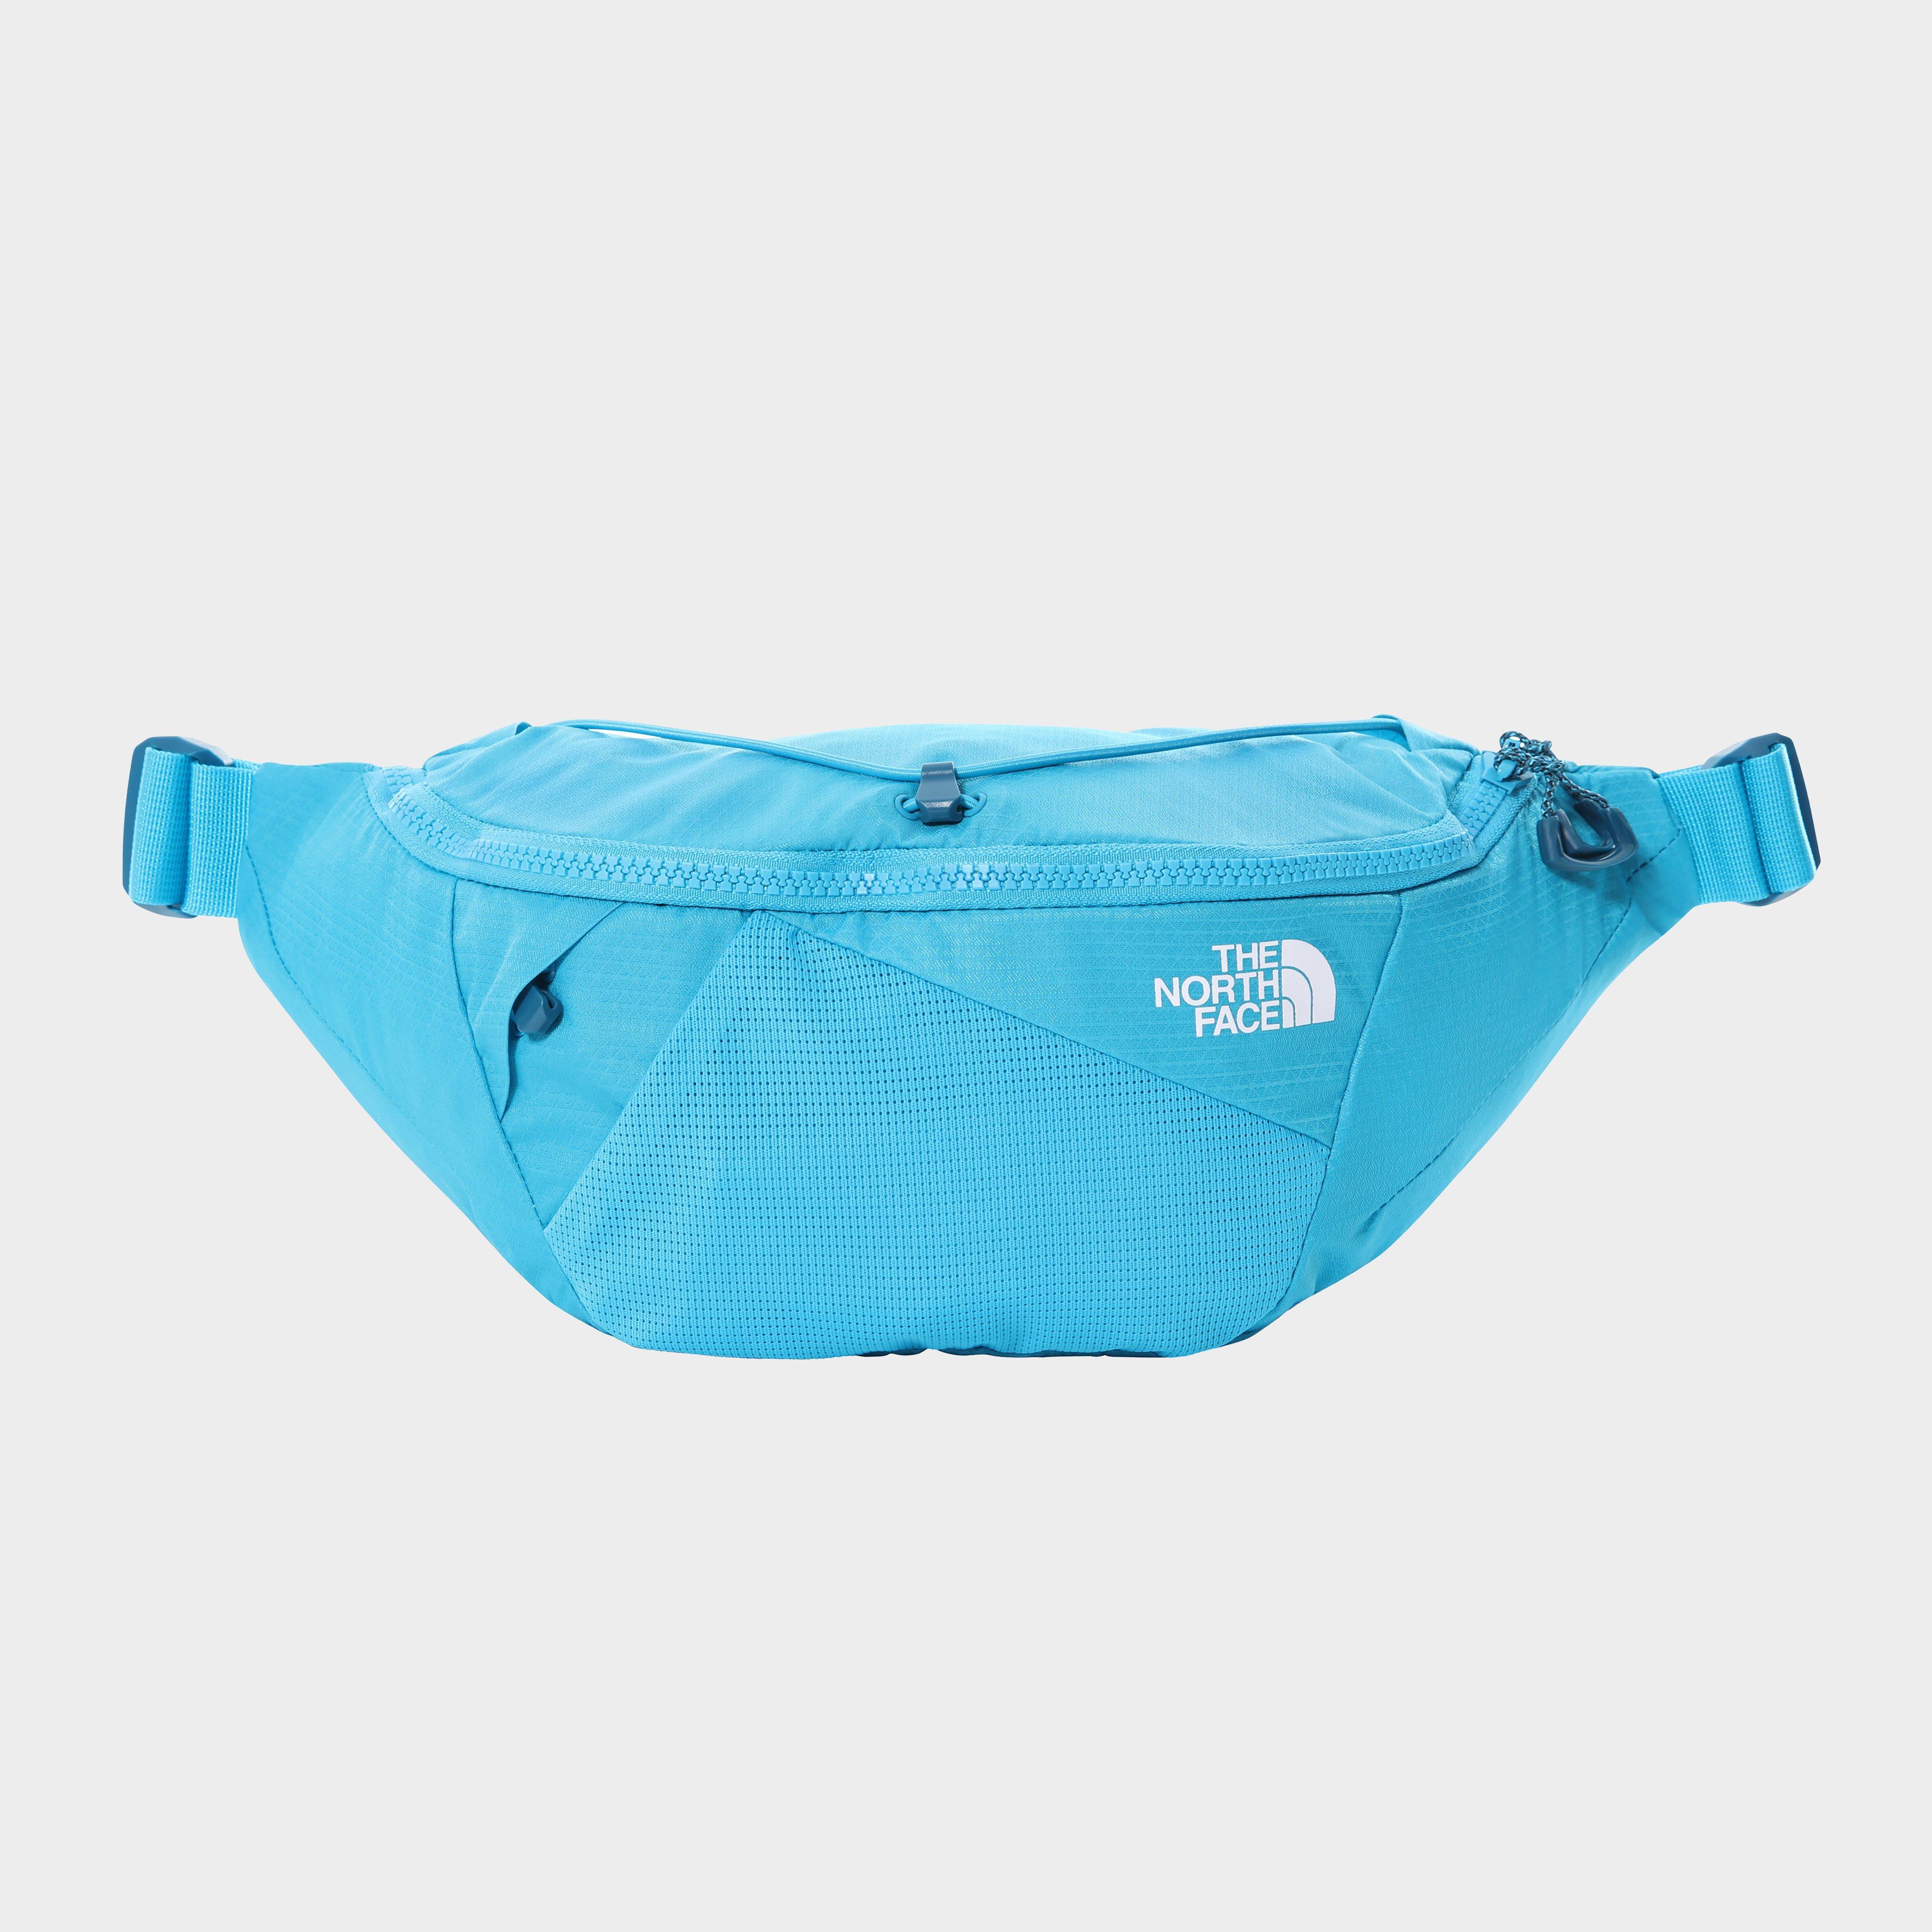 The North Face The North Face Lumbnical Lumbar Side Bag - Blue/blue  Blue/blue